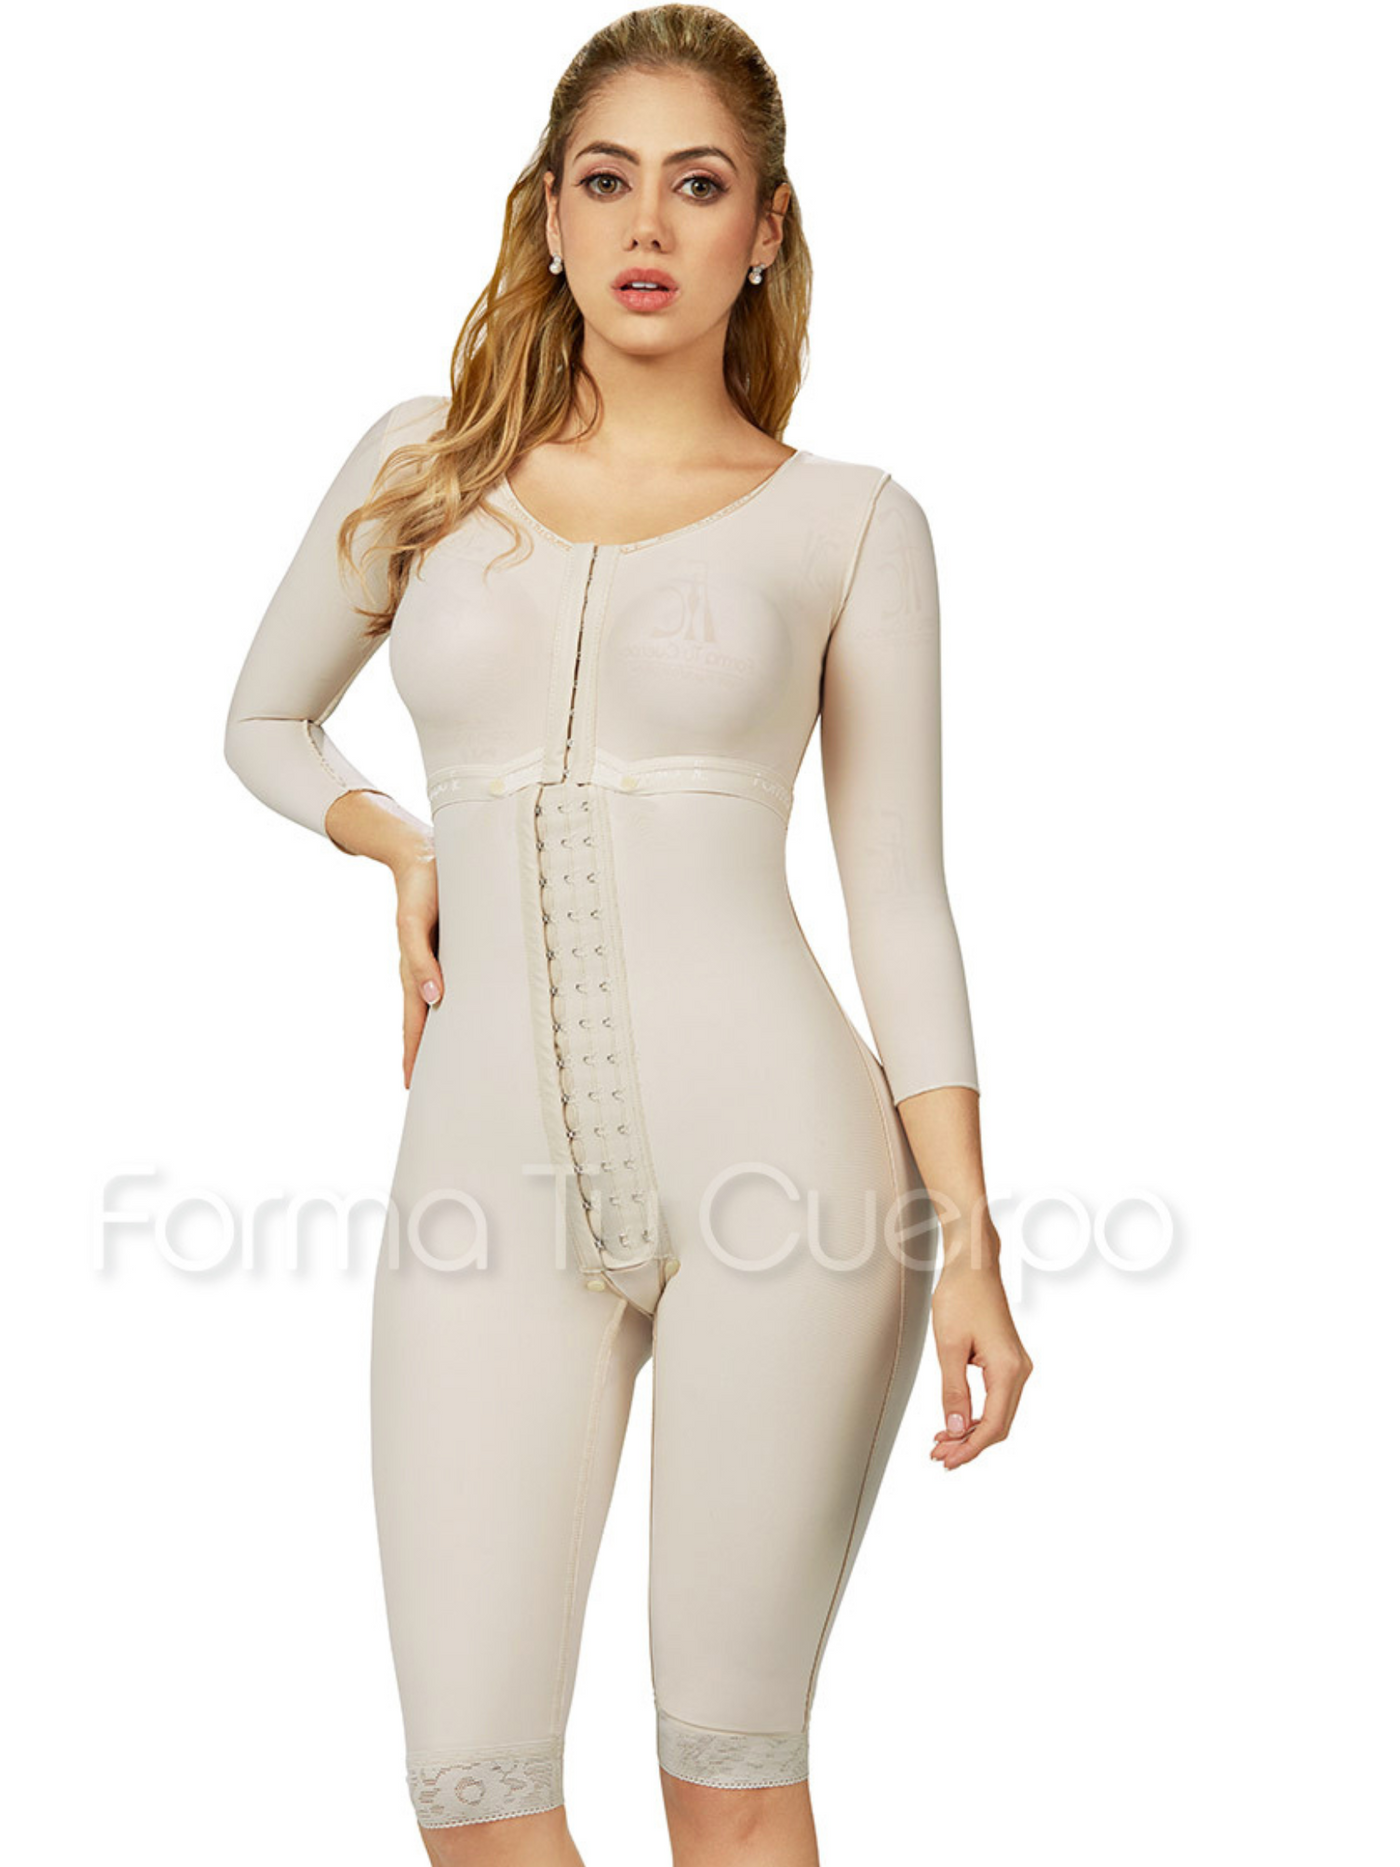 Compression garments for comfort - from Nouvelle Inc.